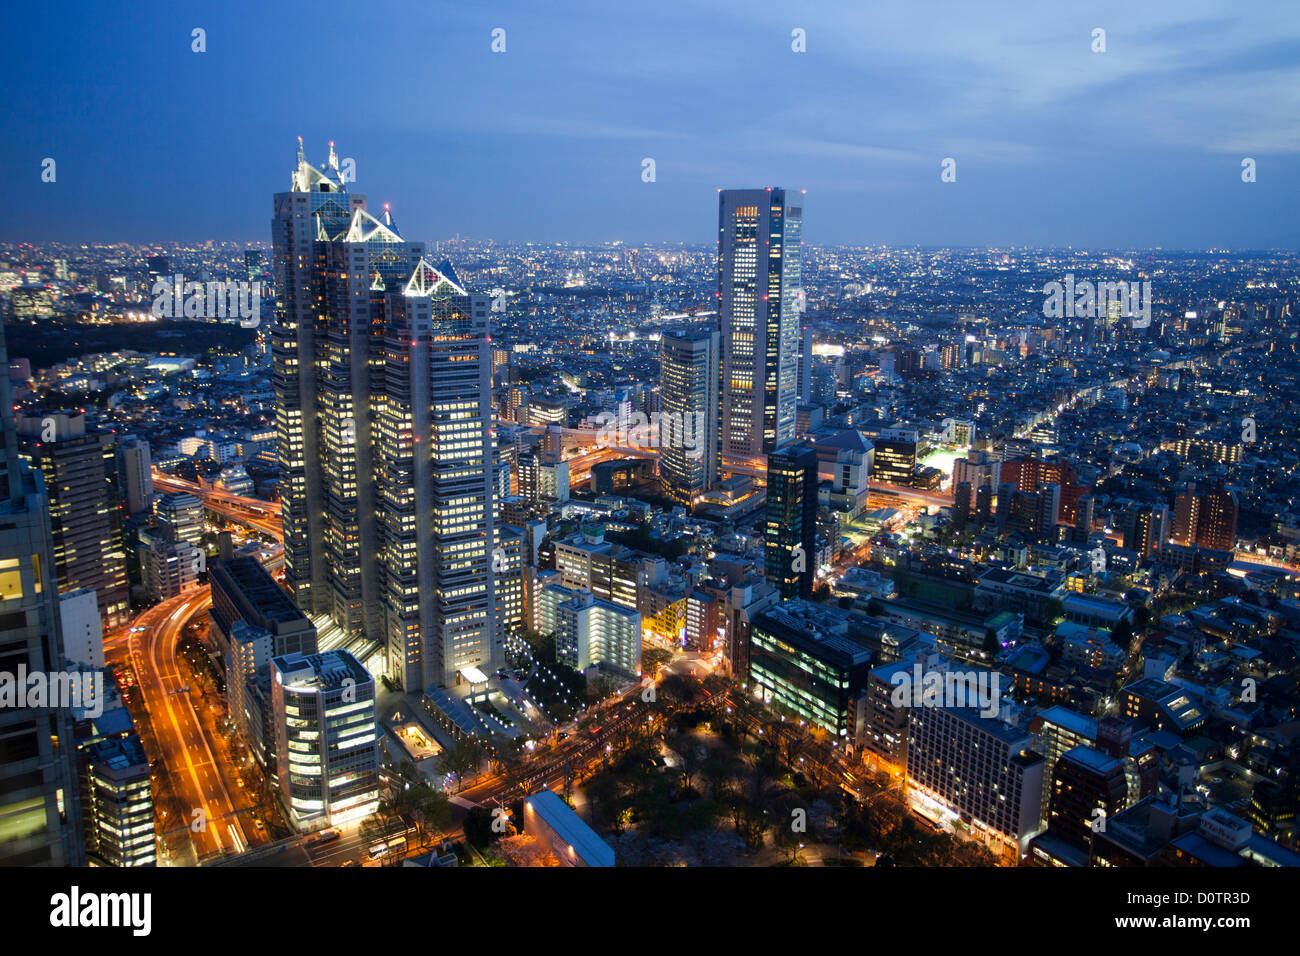 Japan, Asia, holiday, travel, Tokyo, City, Operaza, Building, downtown, skyline, buildings, skyscrapers, night, Stock Photo